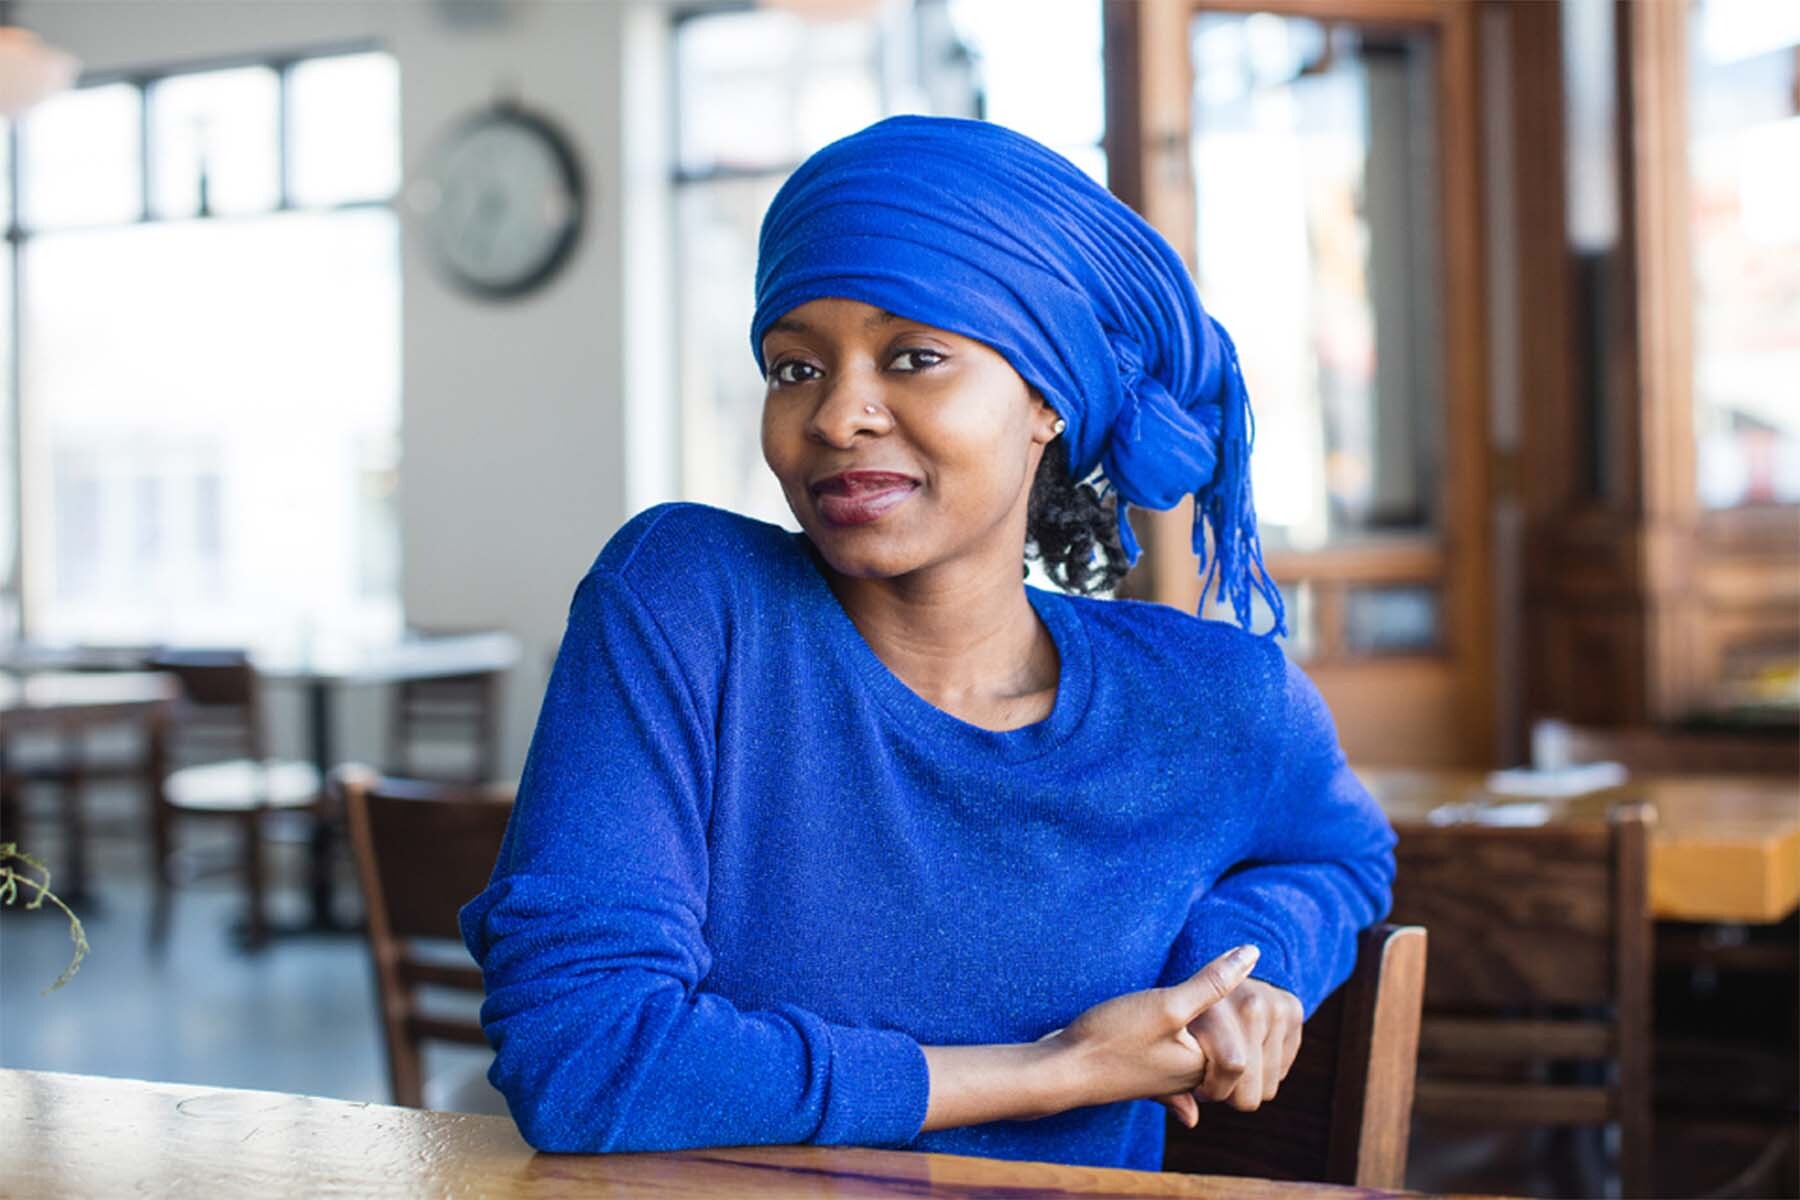 Habiba Cooper Diallo wearing blue and sitting at a table.